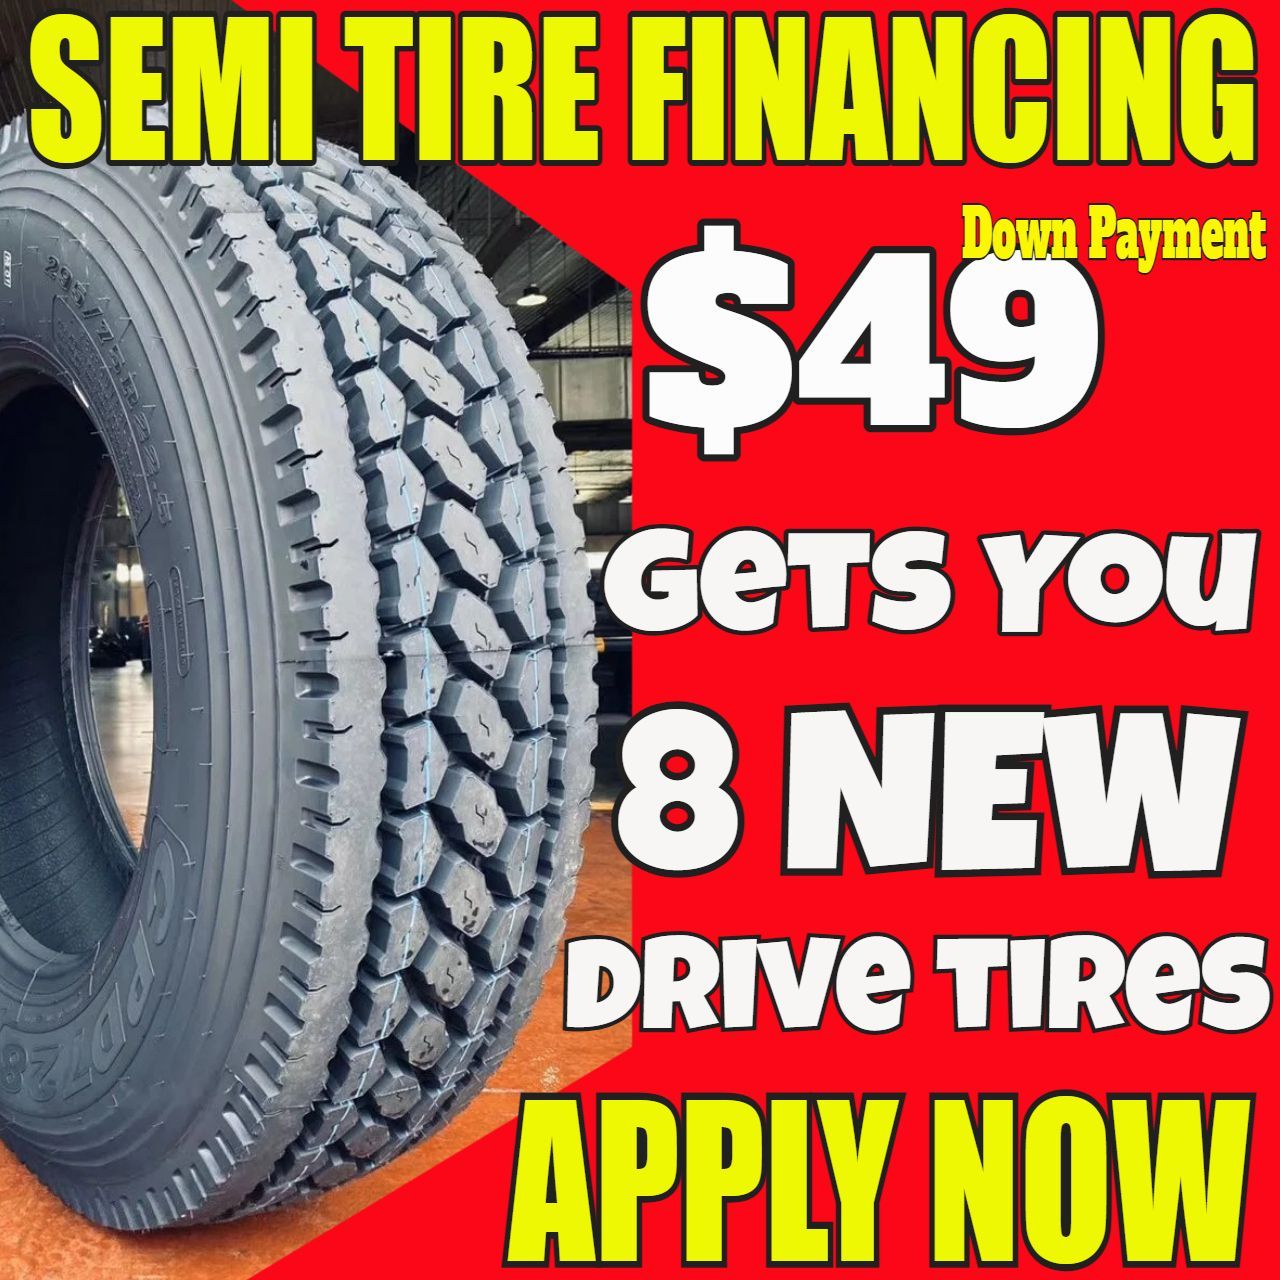 Commercial semi-truck tires Hialeah, FL. 18-wheeler Heavy-duty Big-Rig trucking tires at cheap tractor-trailer auto prices. Port St. Lucie, FL - Tallahassee, FL - Cape Coral, FL